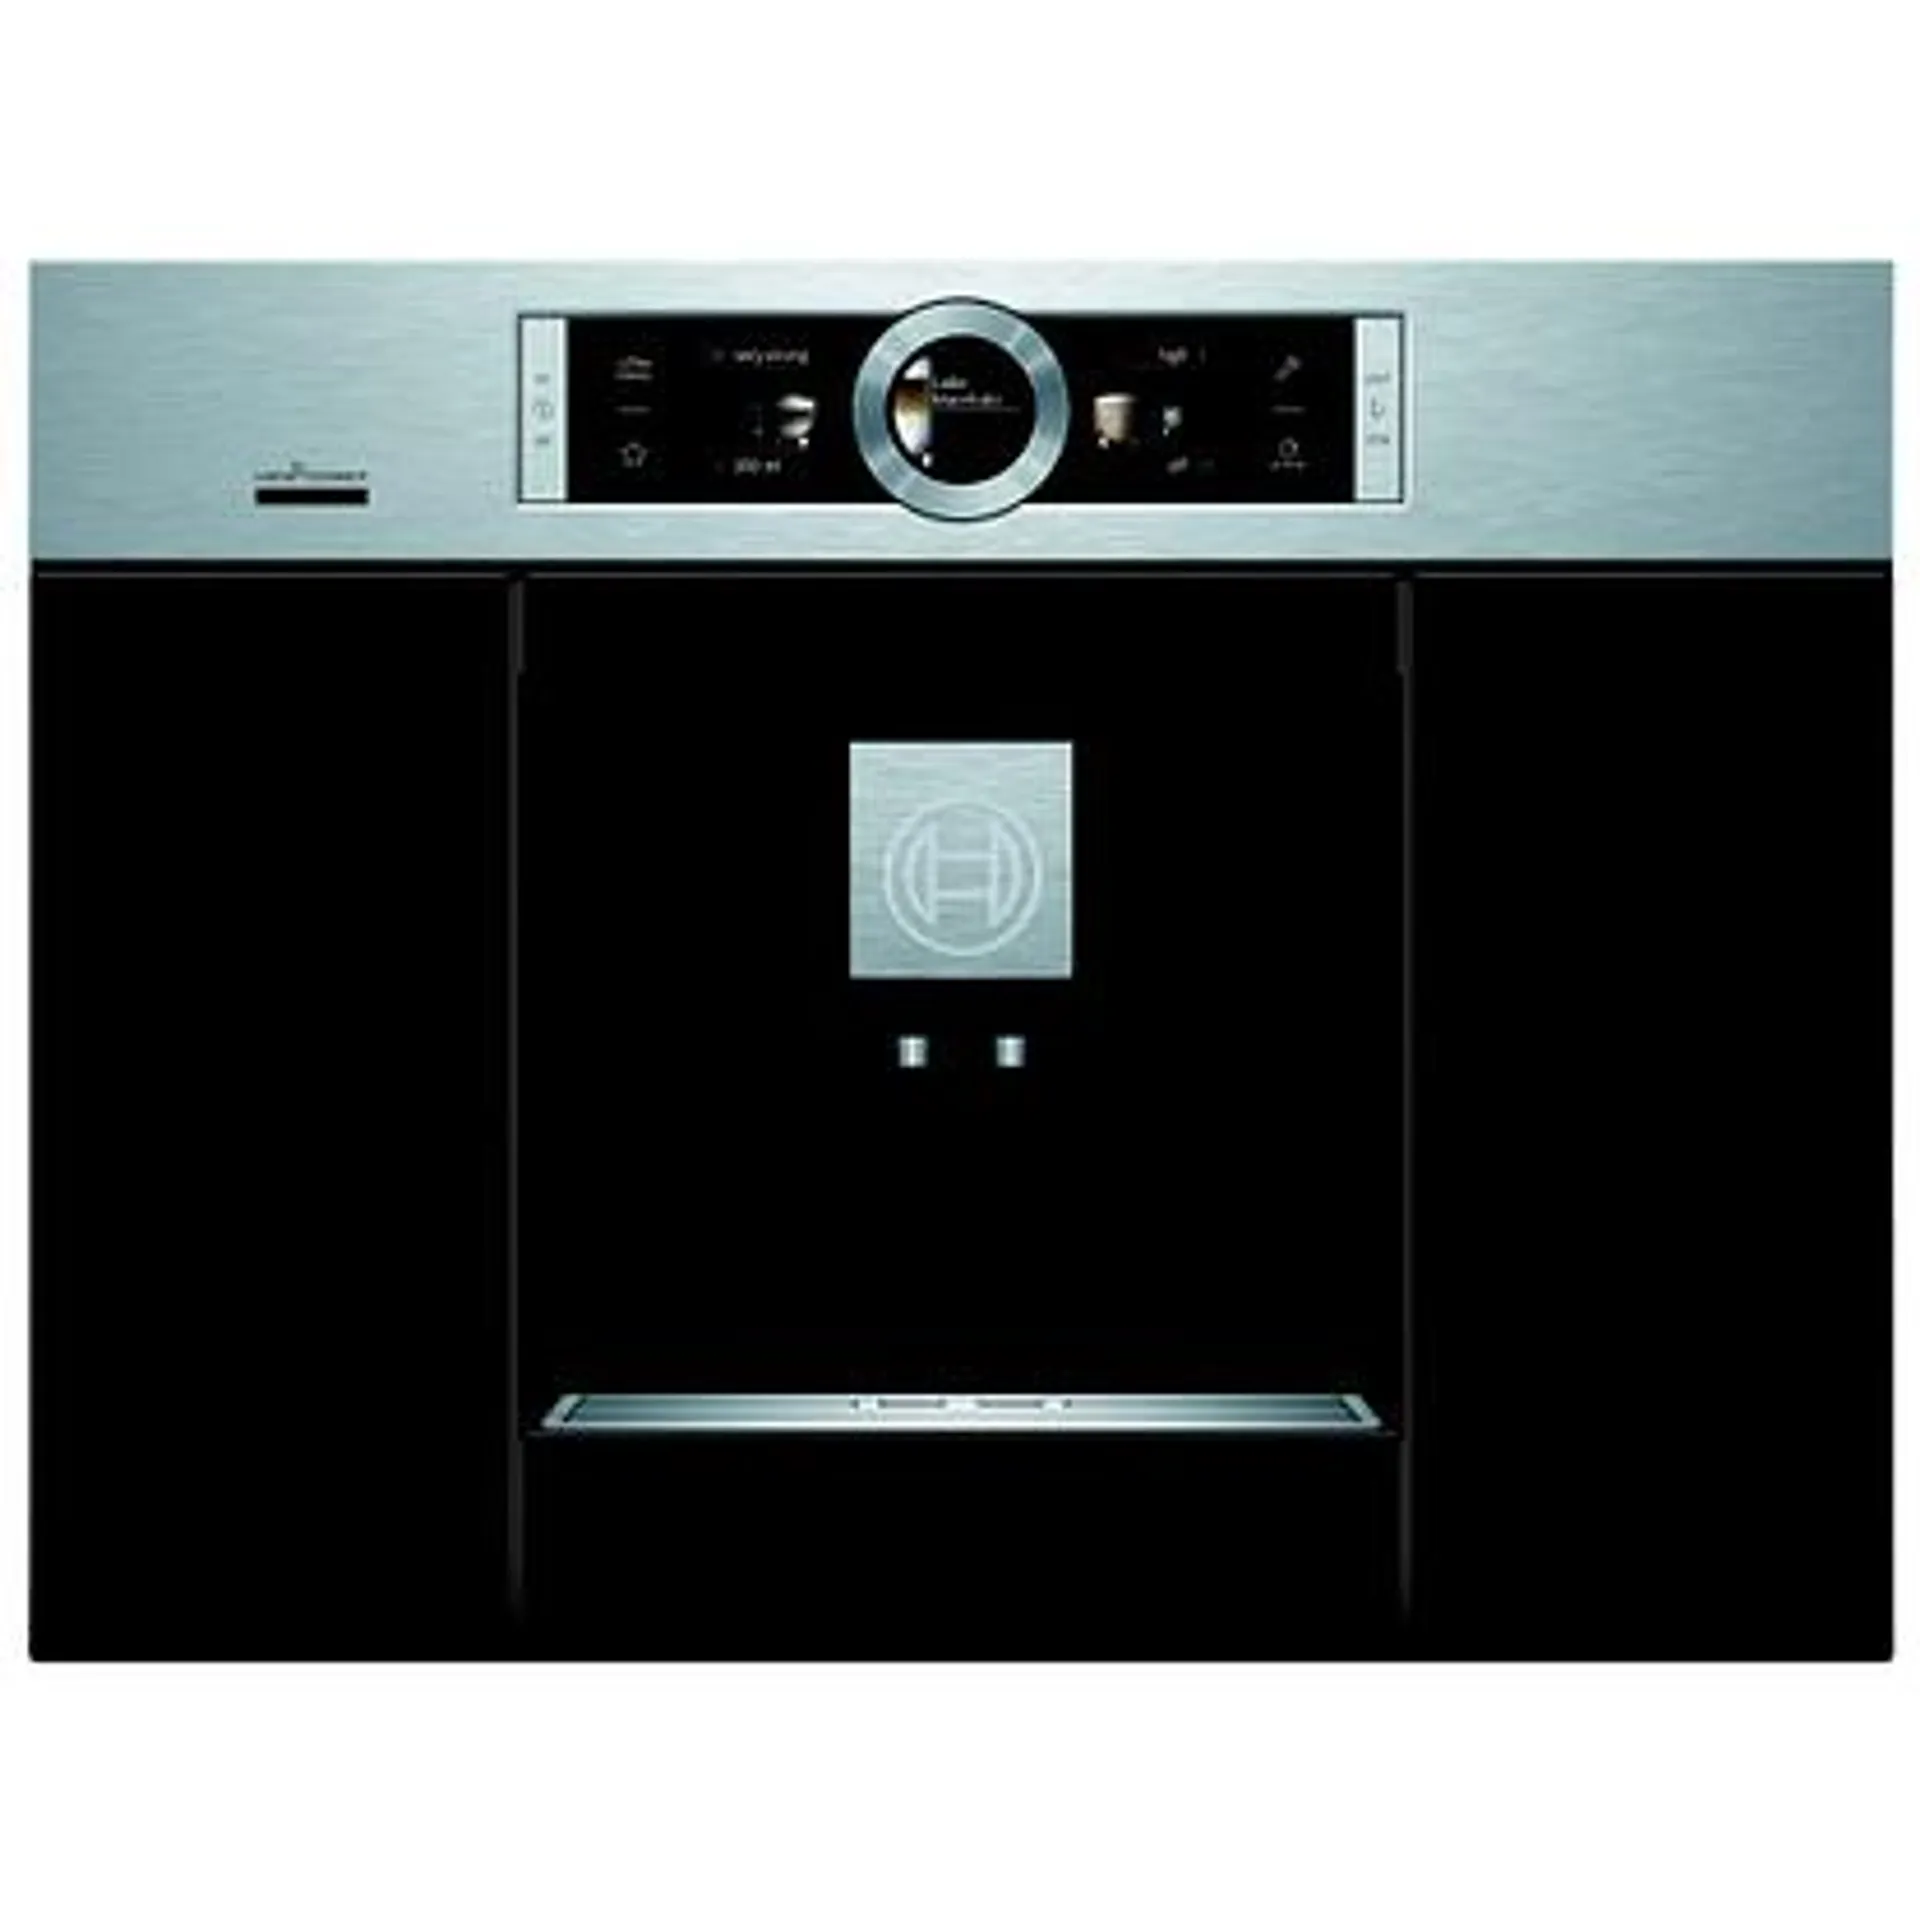 Bosch CTL636ES6 Series 8 Fully Automatic Built In Coffee Machine – STAINLESS STEEL